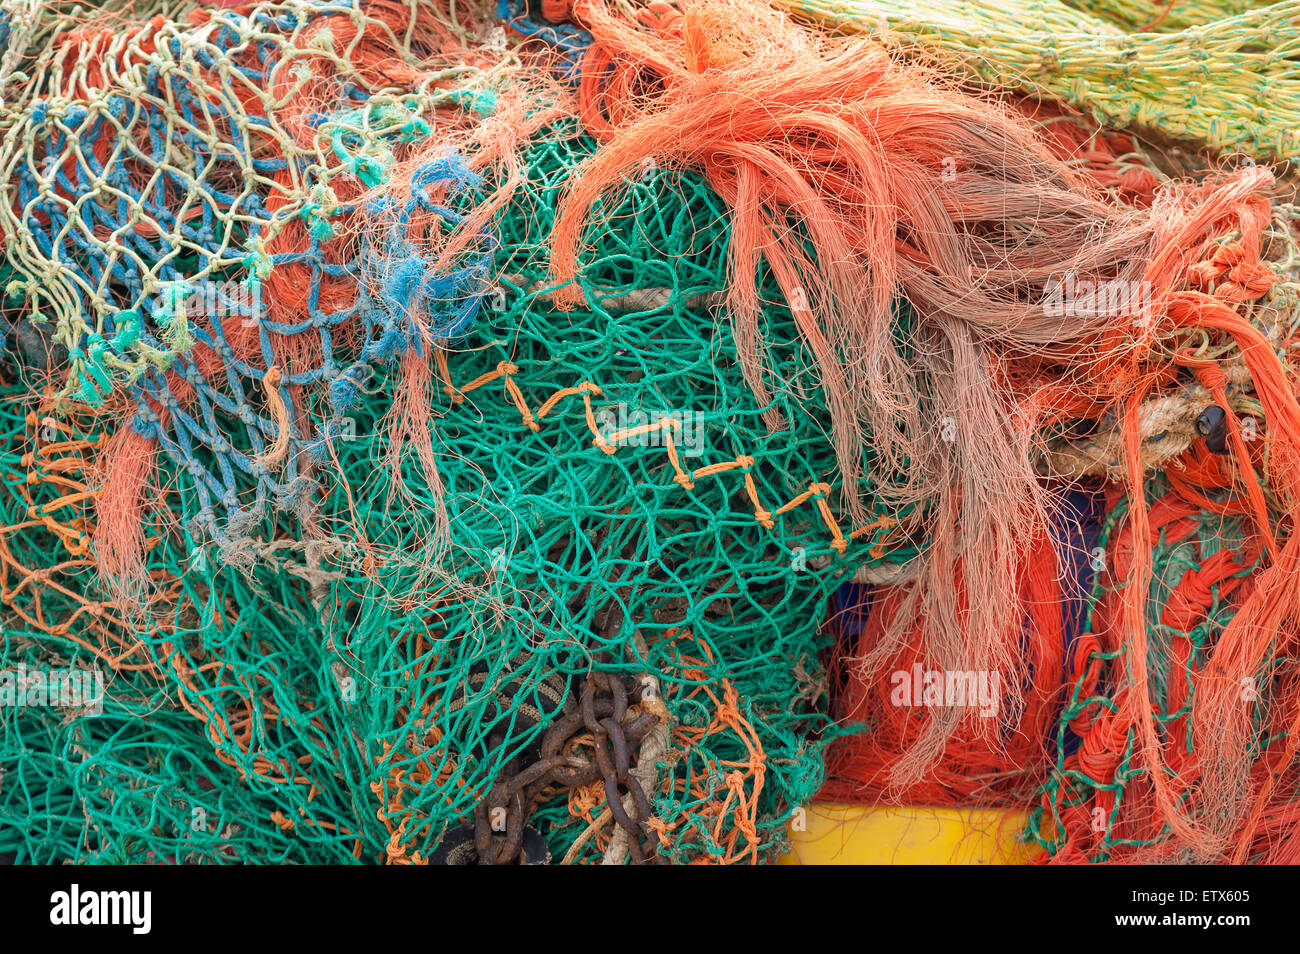 Mass of dry weathered fishing nets with mesh of different sizes a